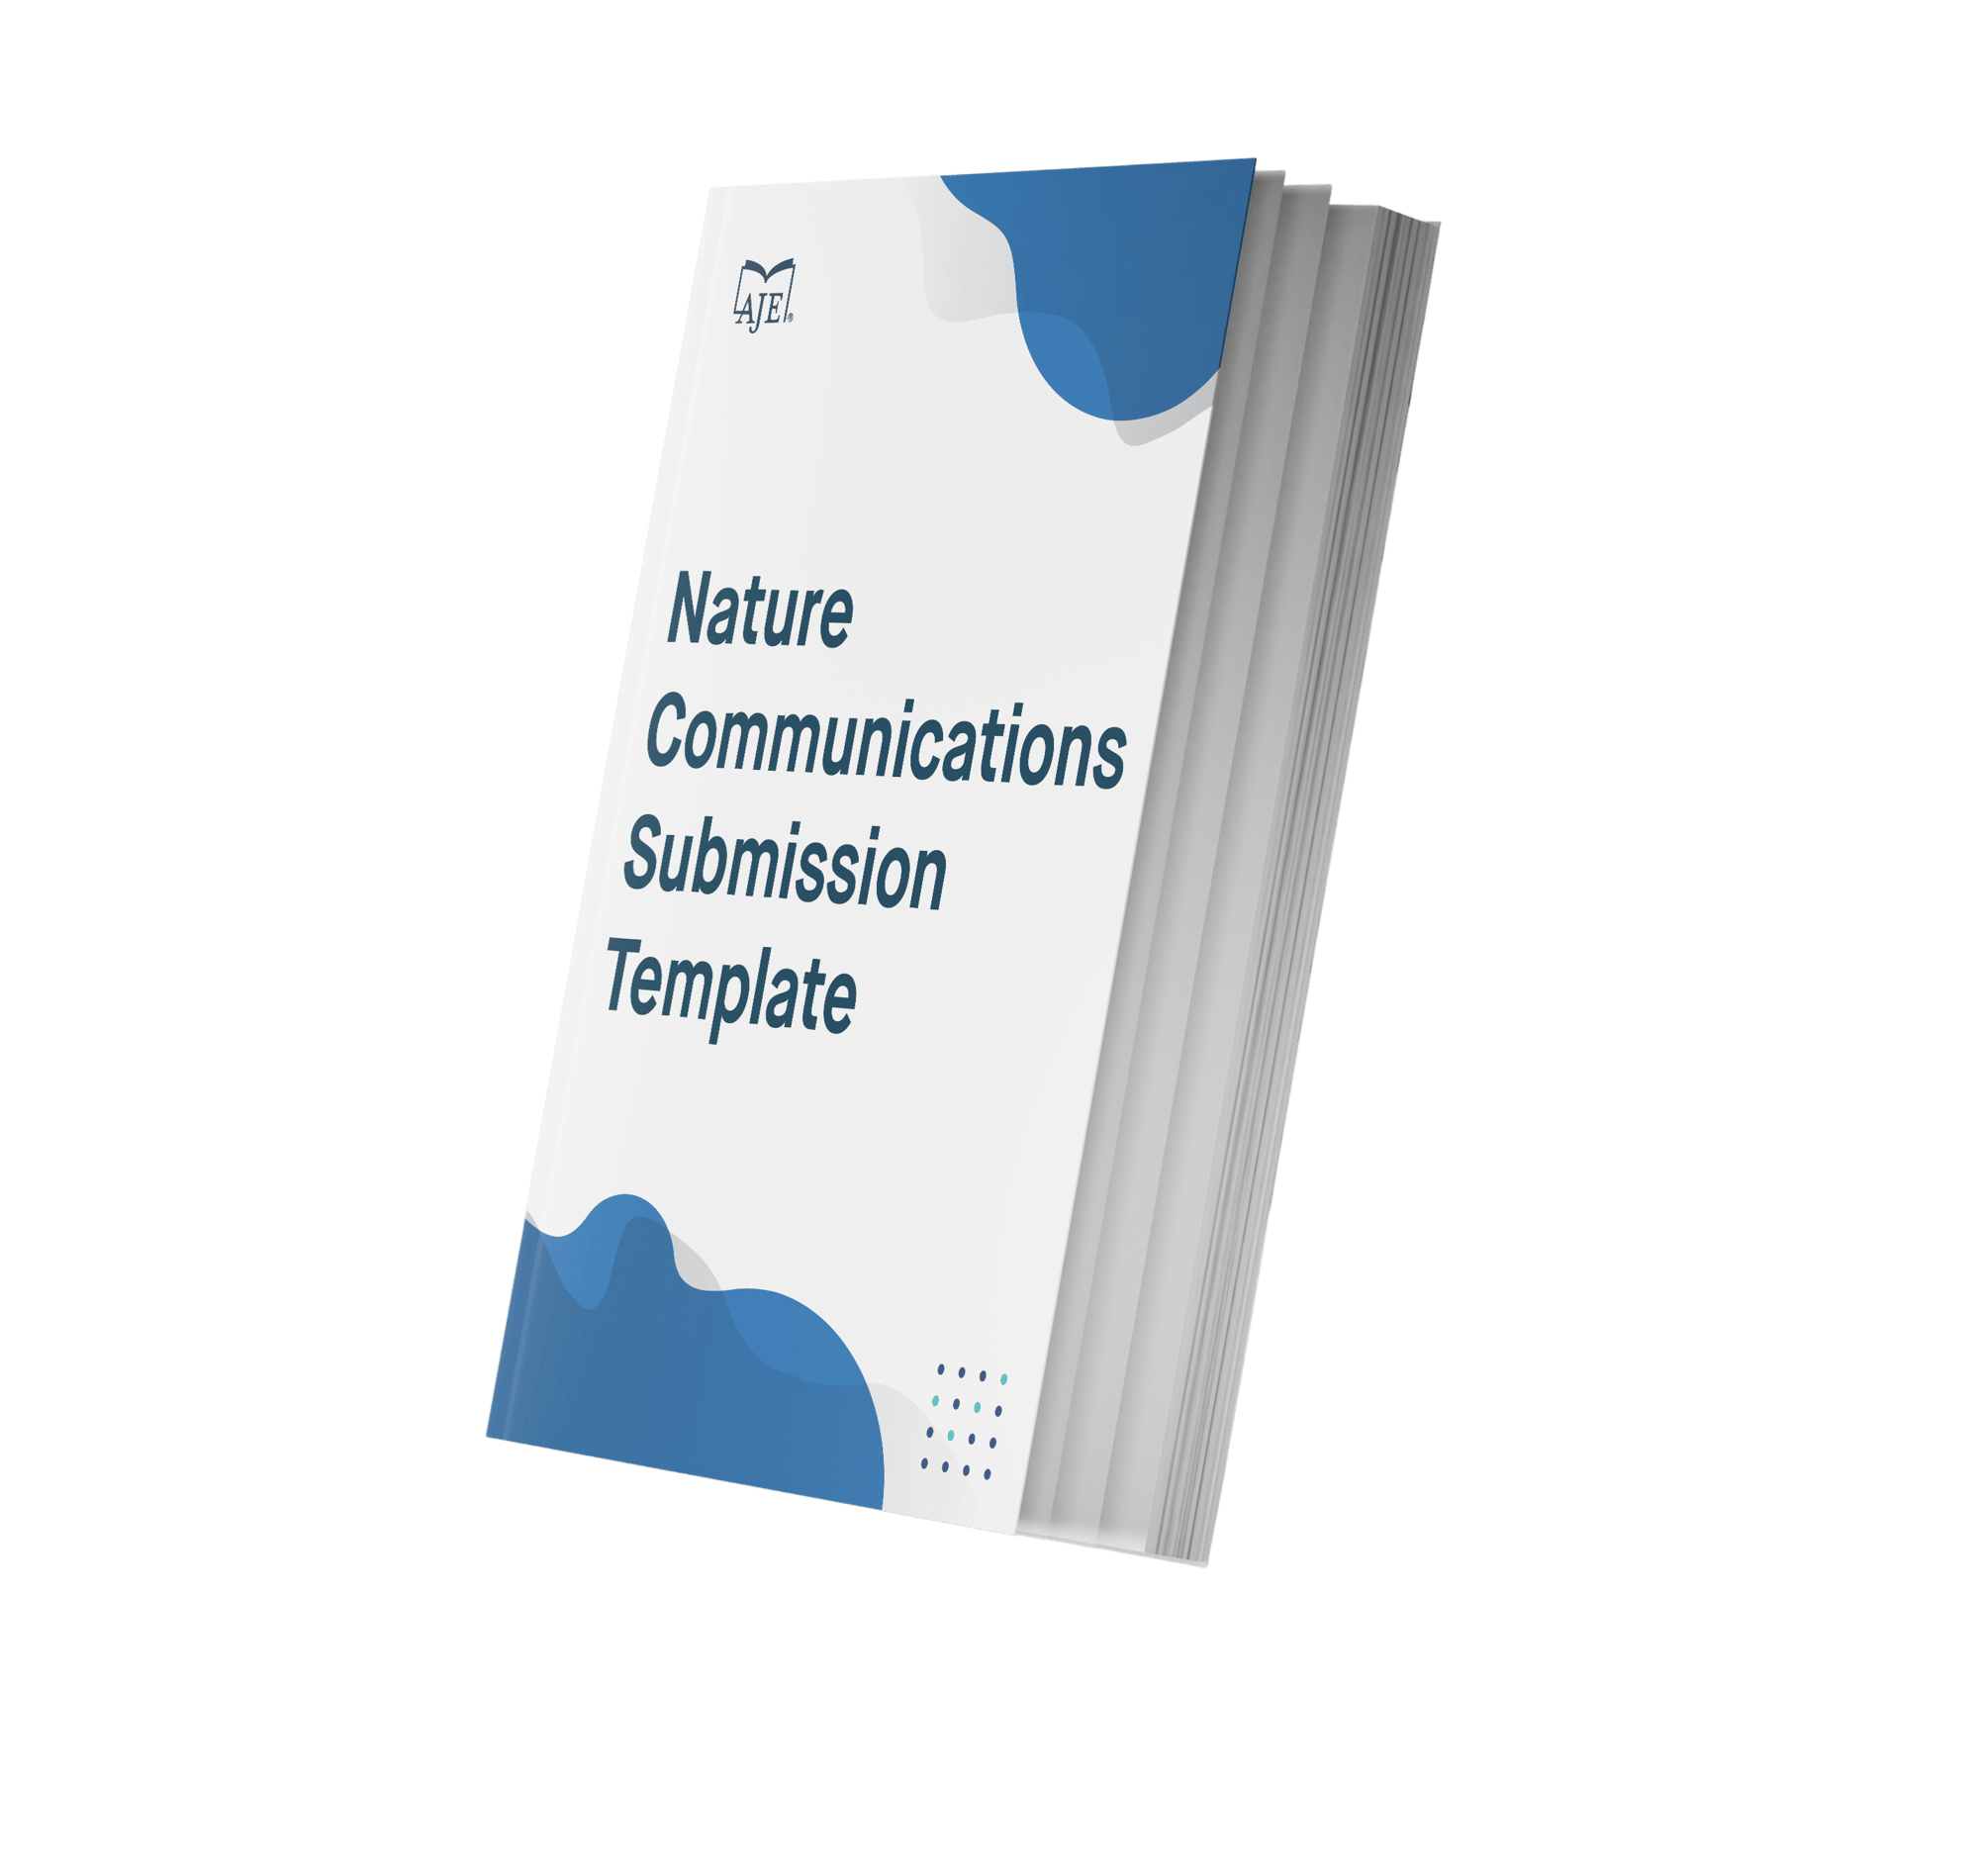 Nature Communications Submission Template - no shadow